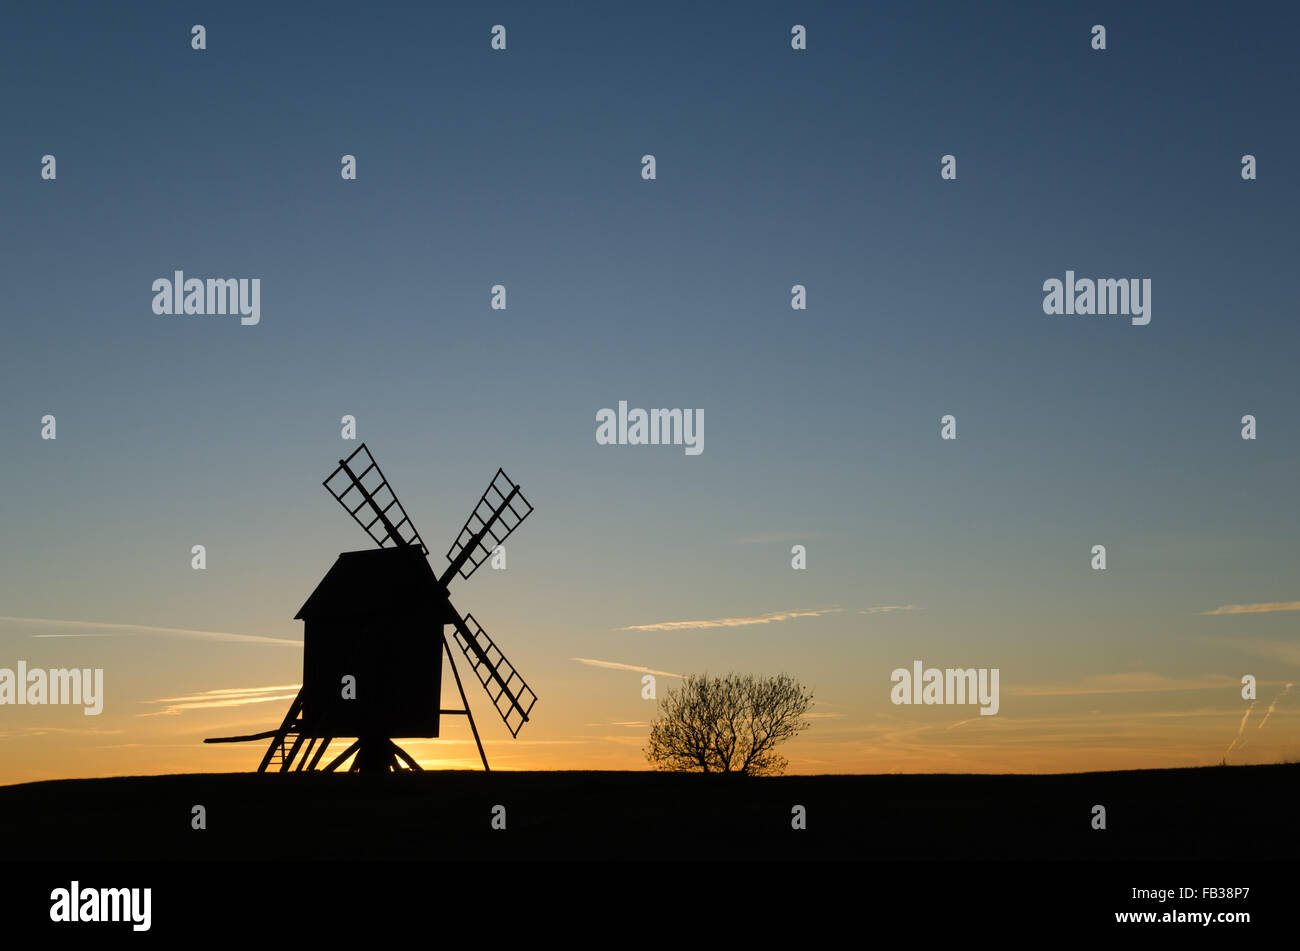 Old windmill silhouette in a clean composition by sunset at the Swedish island Oland, the island of sun and wind. Stock Photo